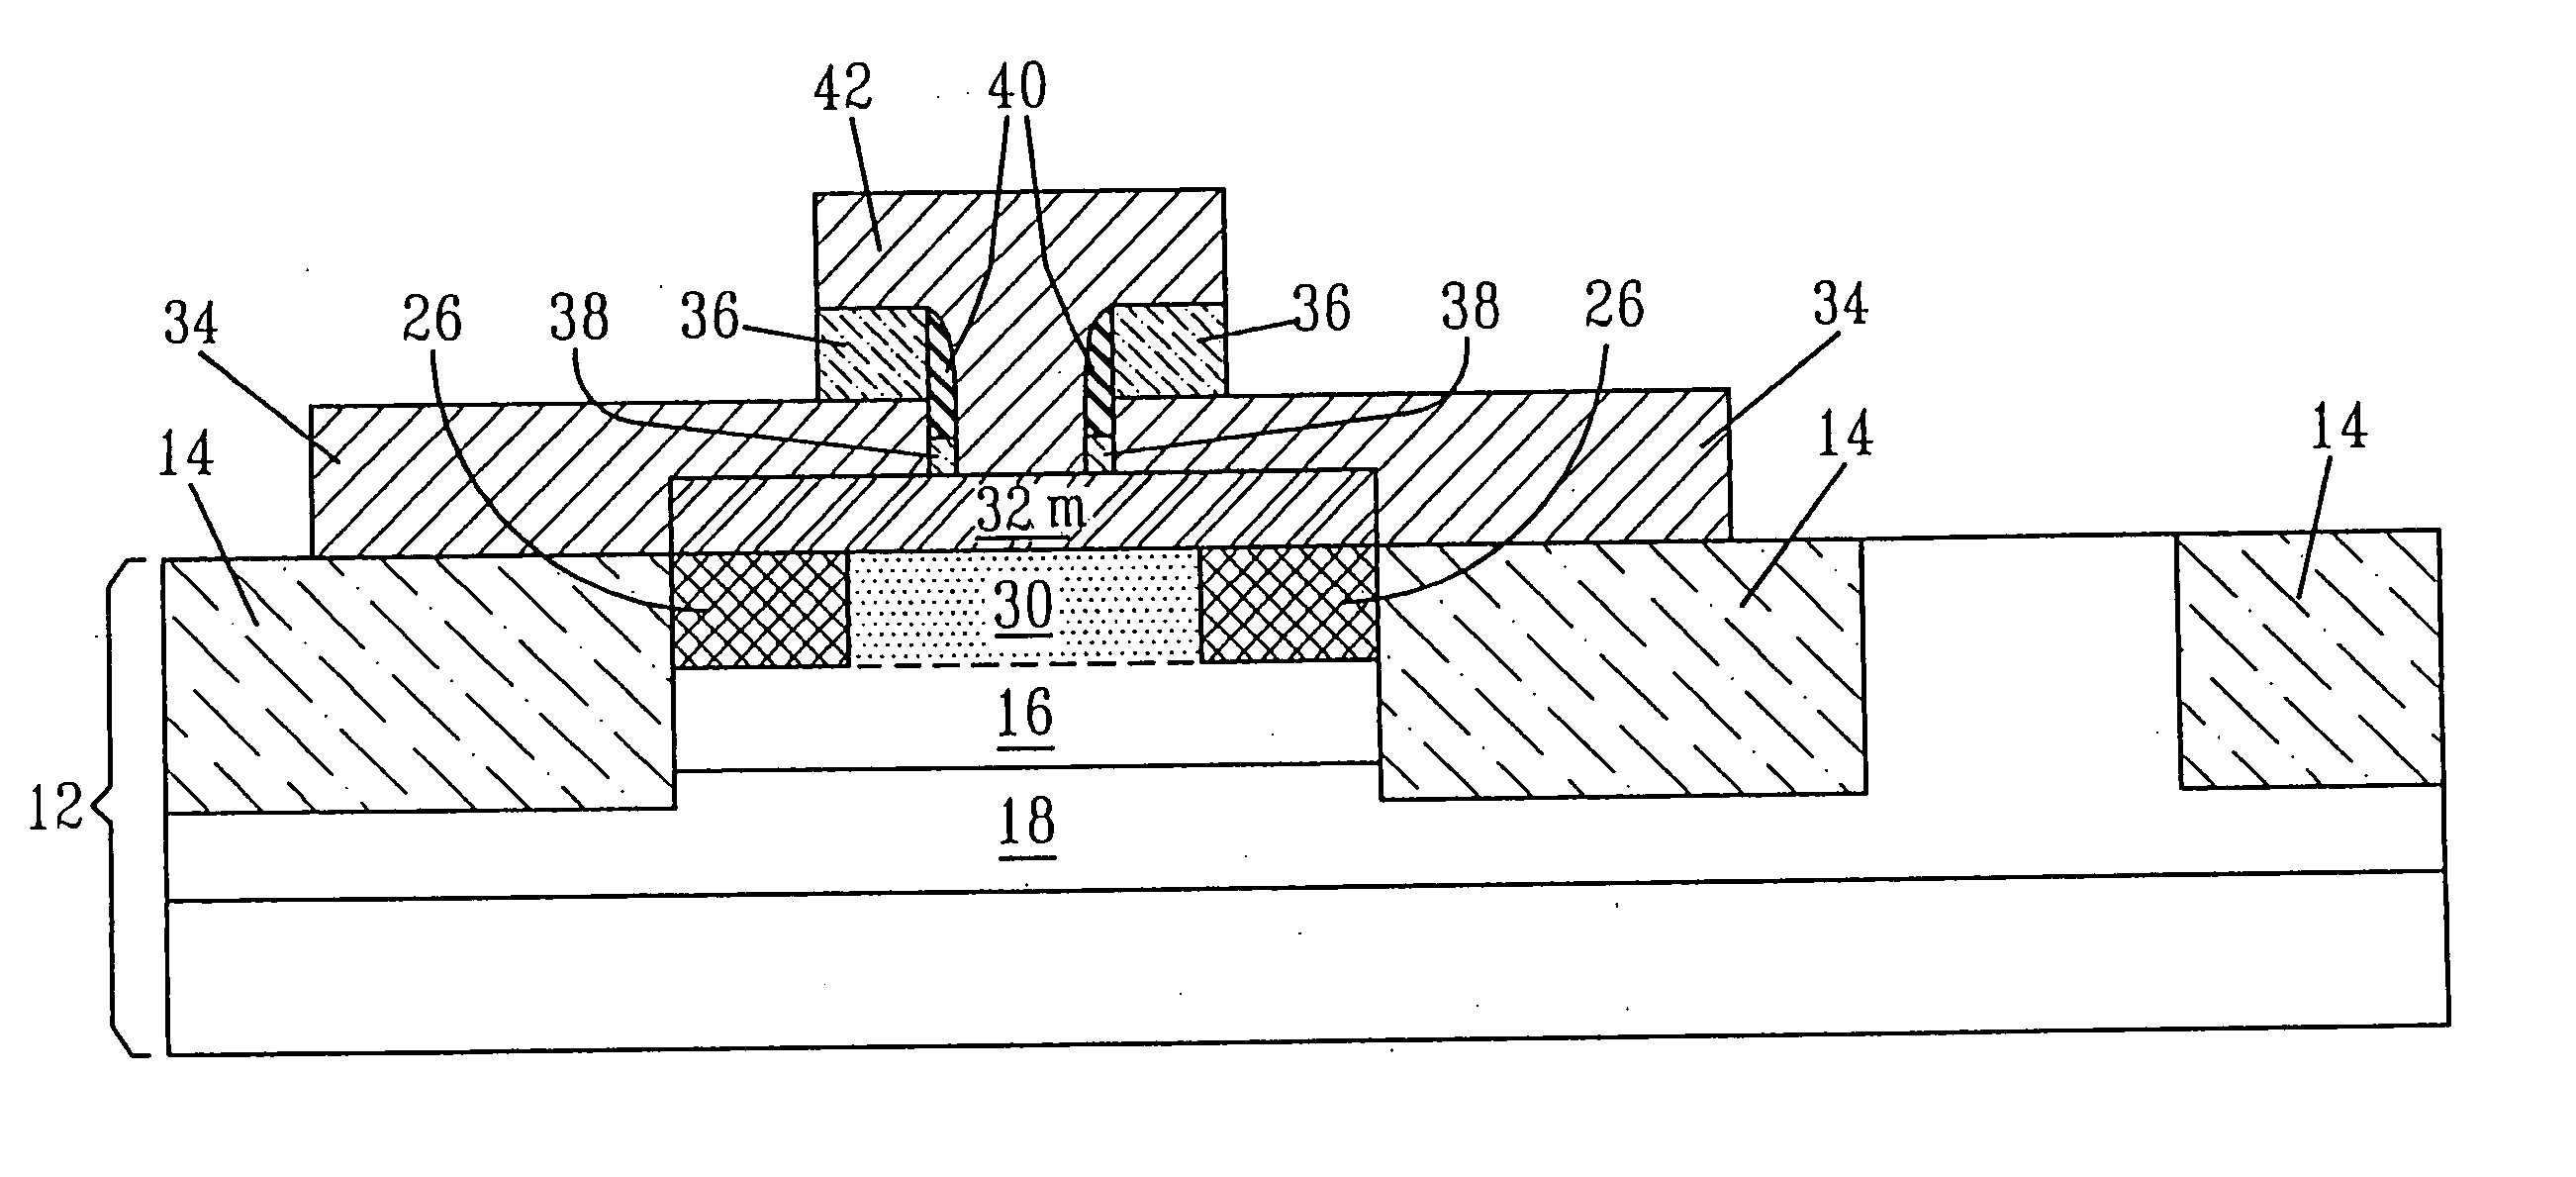 Bipolar transistor with collector having an epitaxial Si:C region